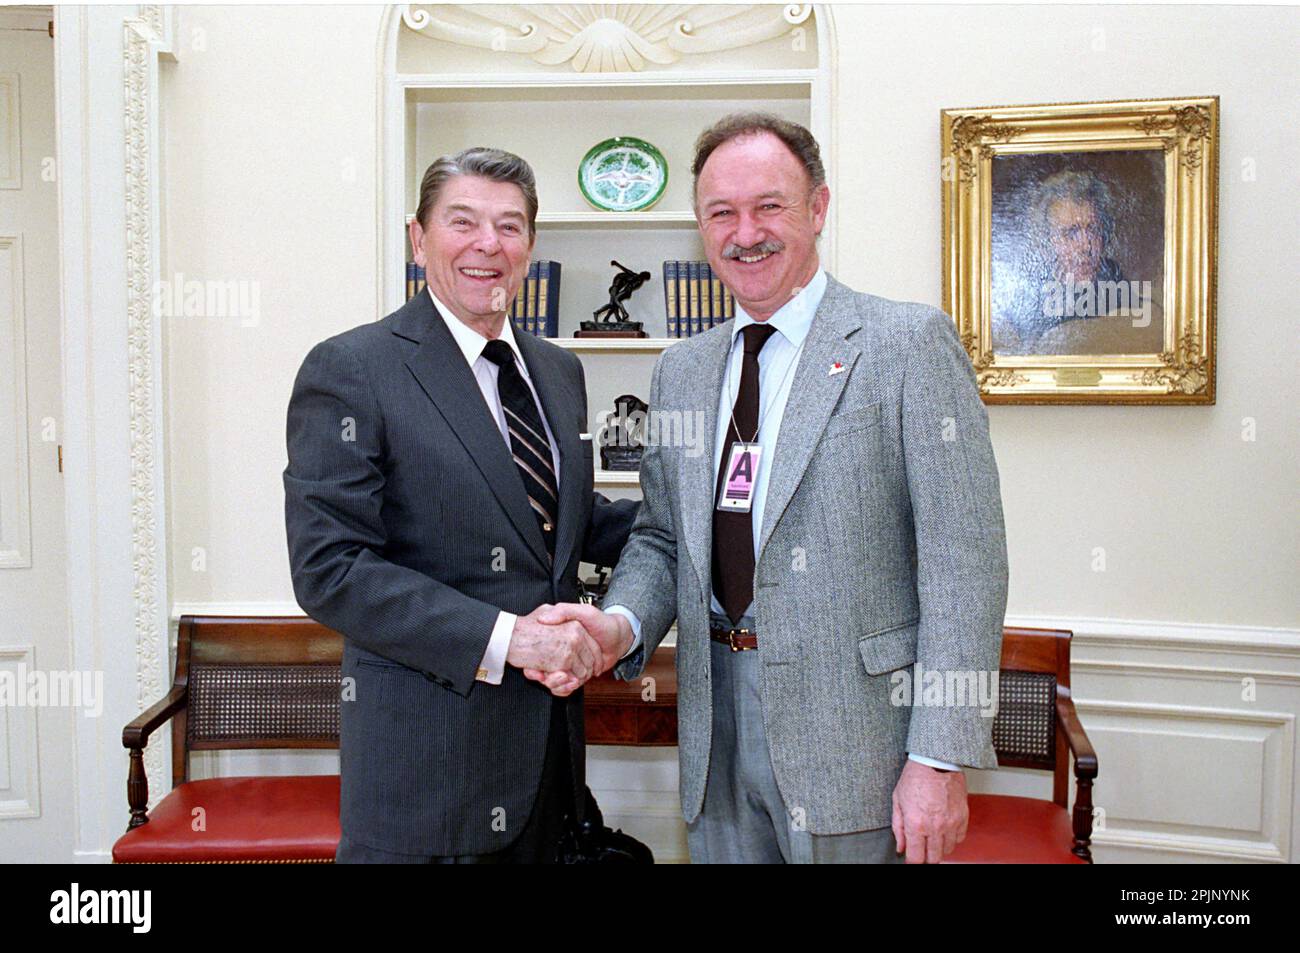 President Ronald Reagan greets actor Gene Hackman (right) in the White House Oval Office, Washington, DC,2/6/1987. (Photo by White House Photo Collection) Stock Photo